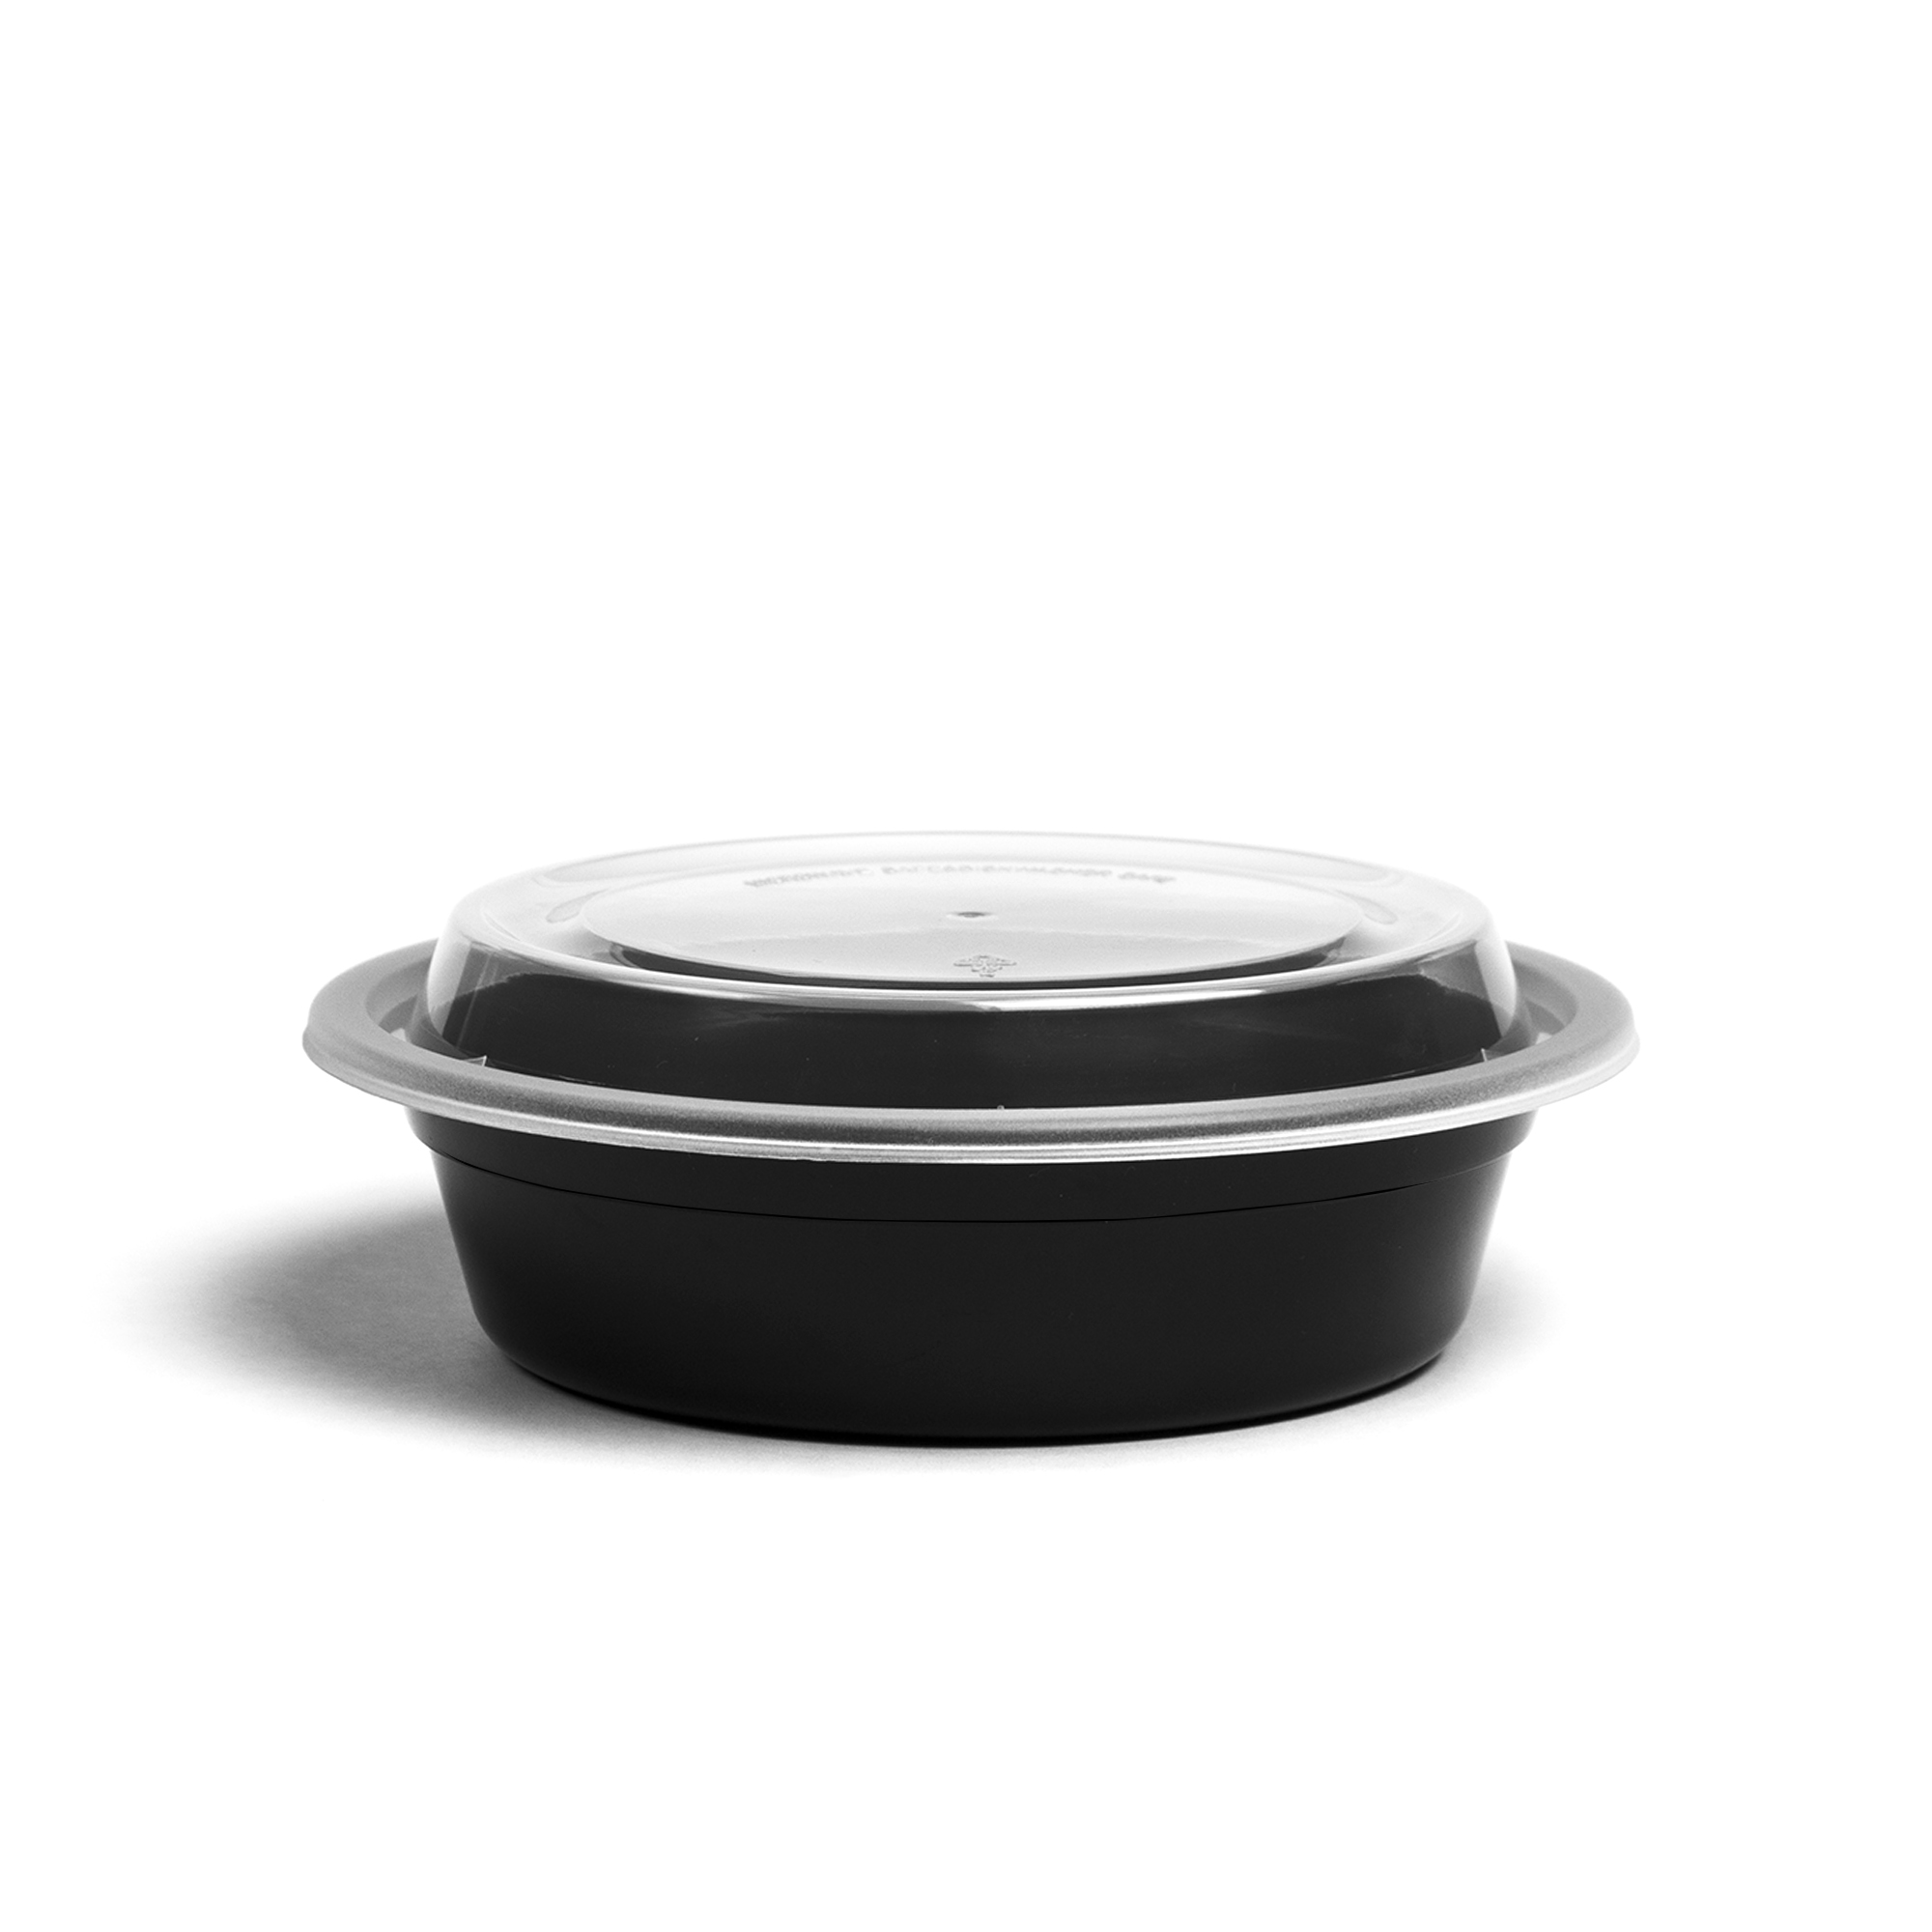 1/2 Gallon (64 oz.) BPA Free Food Grade Round Container with Lid (T60764) -  starting quantity 25 count - FREE SHIPPING - ePackageSupply